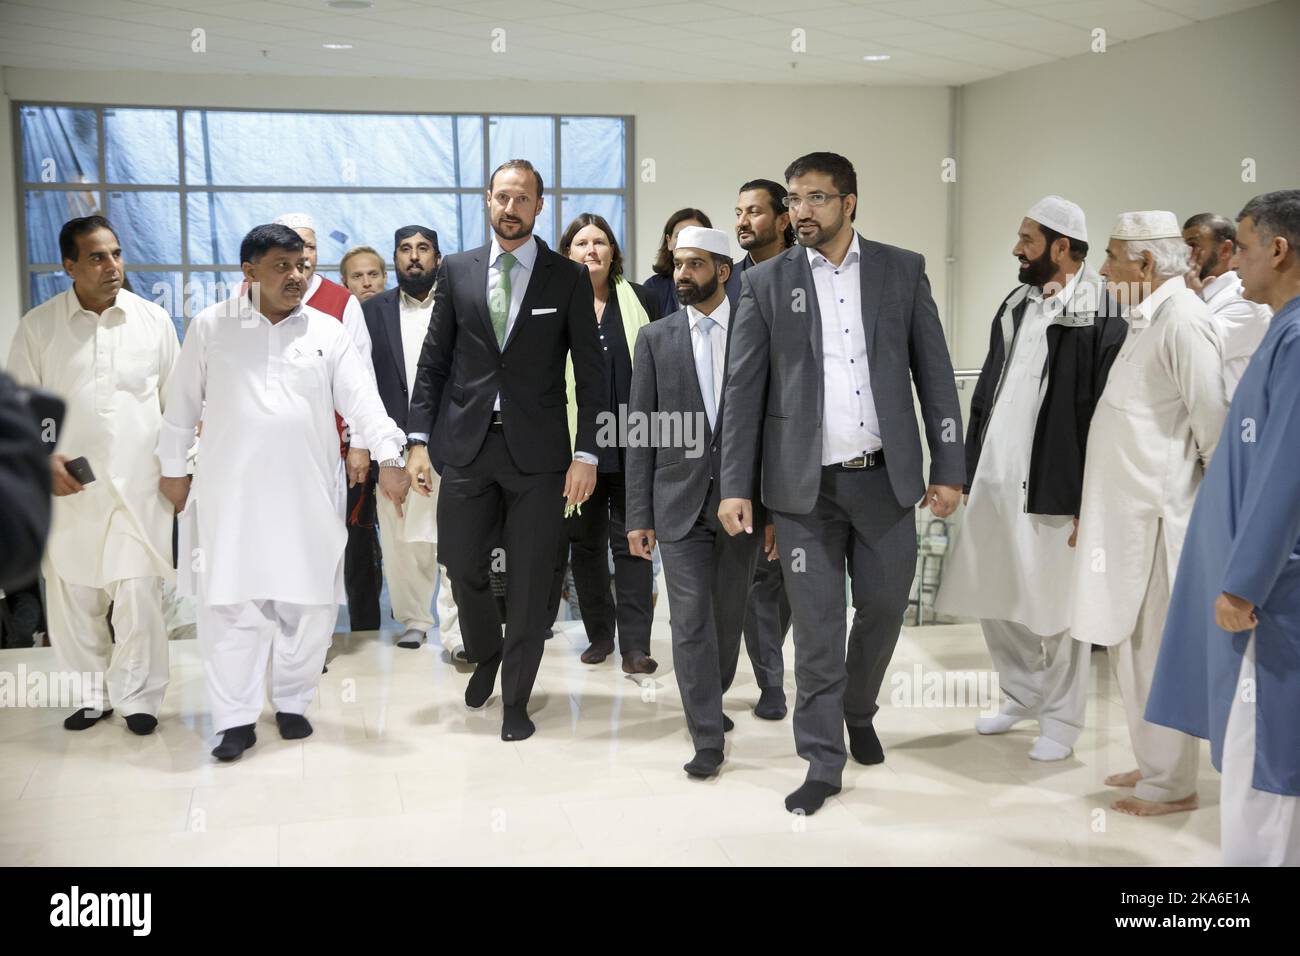 OSLO, Norway 20150918. Crown Prince Haakon visits Central Jamaat-e Ahl-e Sunnat mosques in Groenland in Oslo Friday. On that occasion opens the Crown Prince a conference for young religious and ethical leaders. It is 'Samarbeidsraadet for tros- og livssynssamfunn' who is organizing the conference. Conspiracy thinking, leadership training and the prevention of violent extremism are among the topics. . Mosque chairman Ghulam Sarwar (in white) who shows the Crown Prince the great hall. Photo: Heiko Junge / NTB scanpix Stock Photo